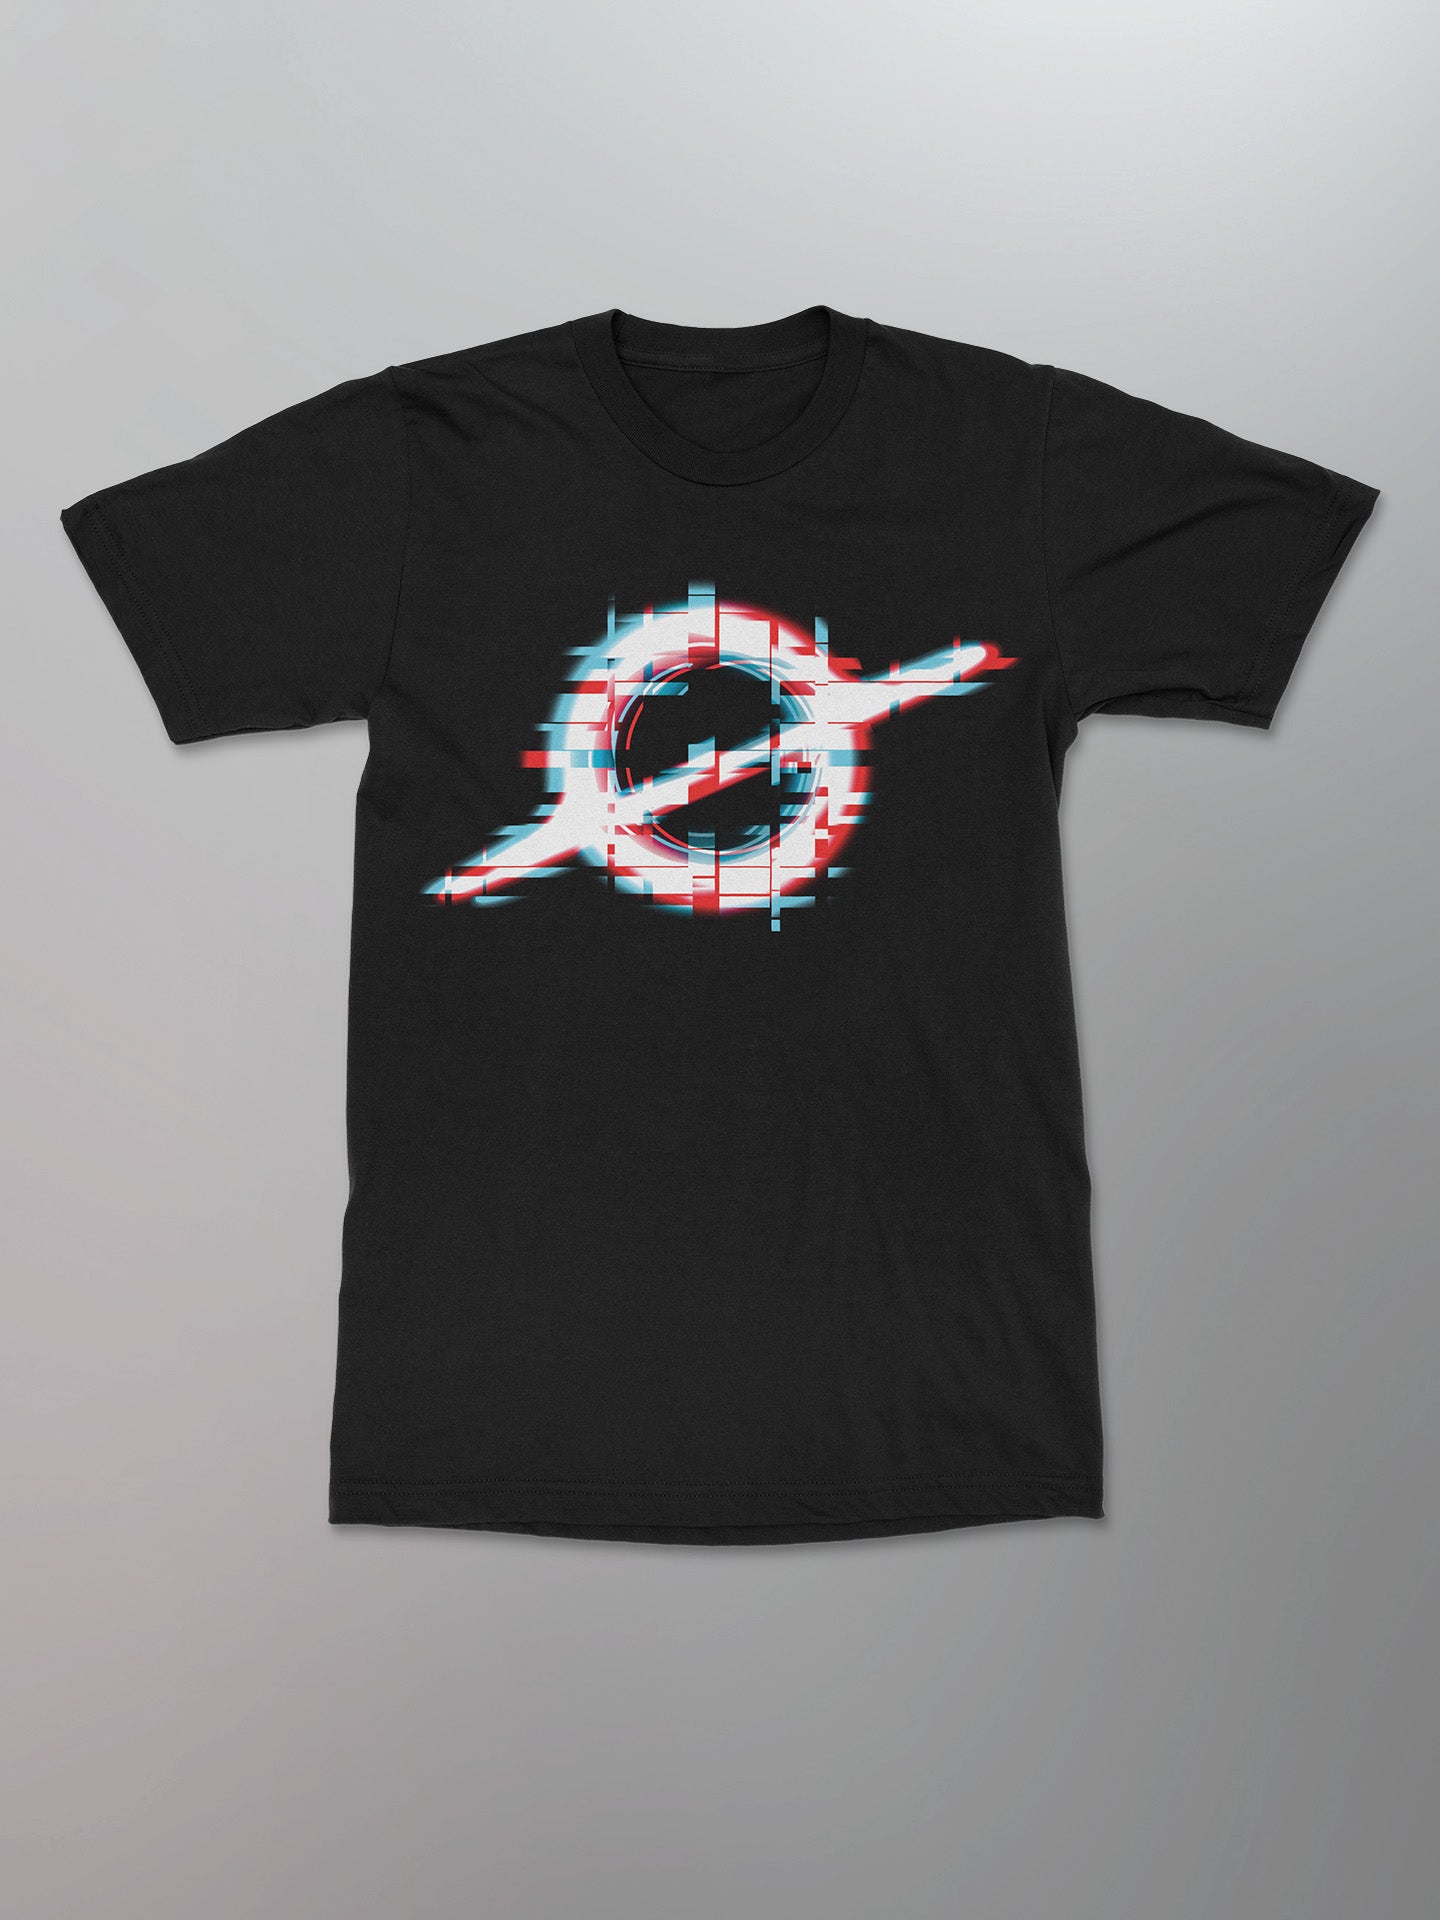 Raizer - The Last Day Of The Universe Shirt